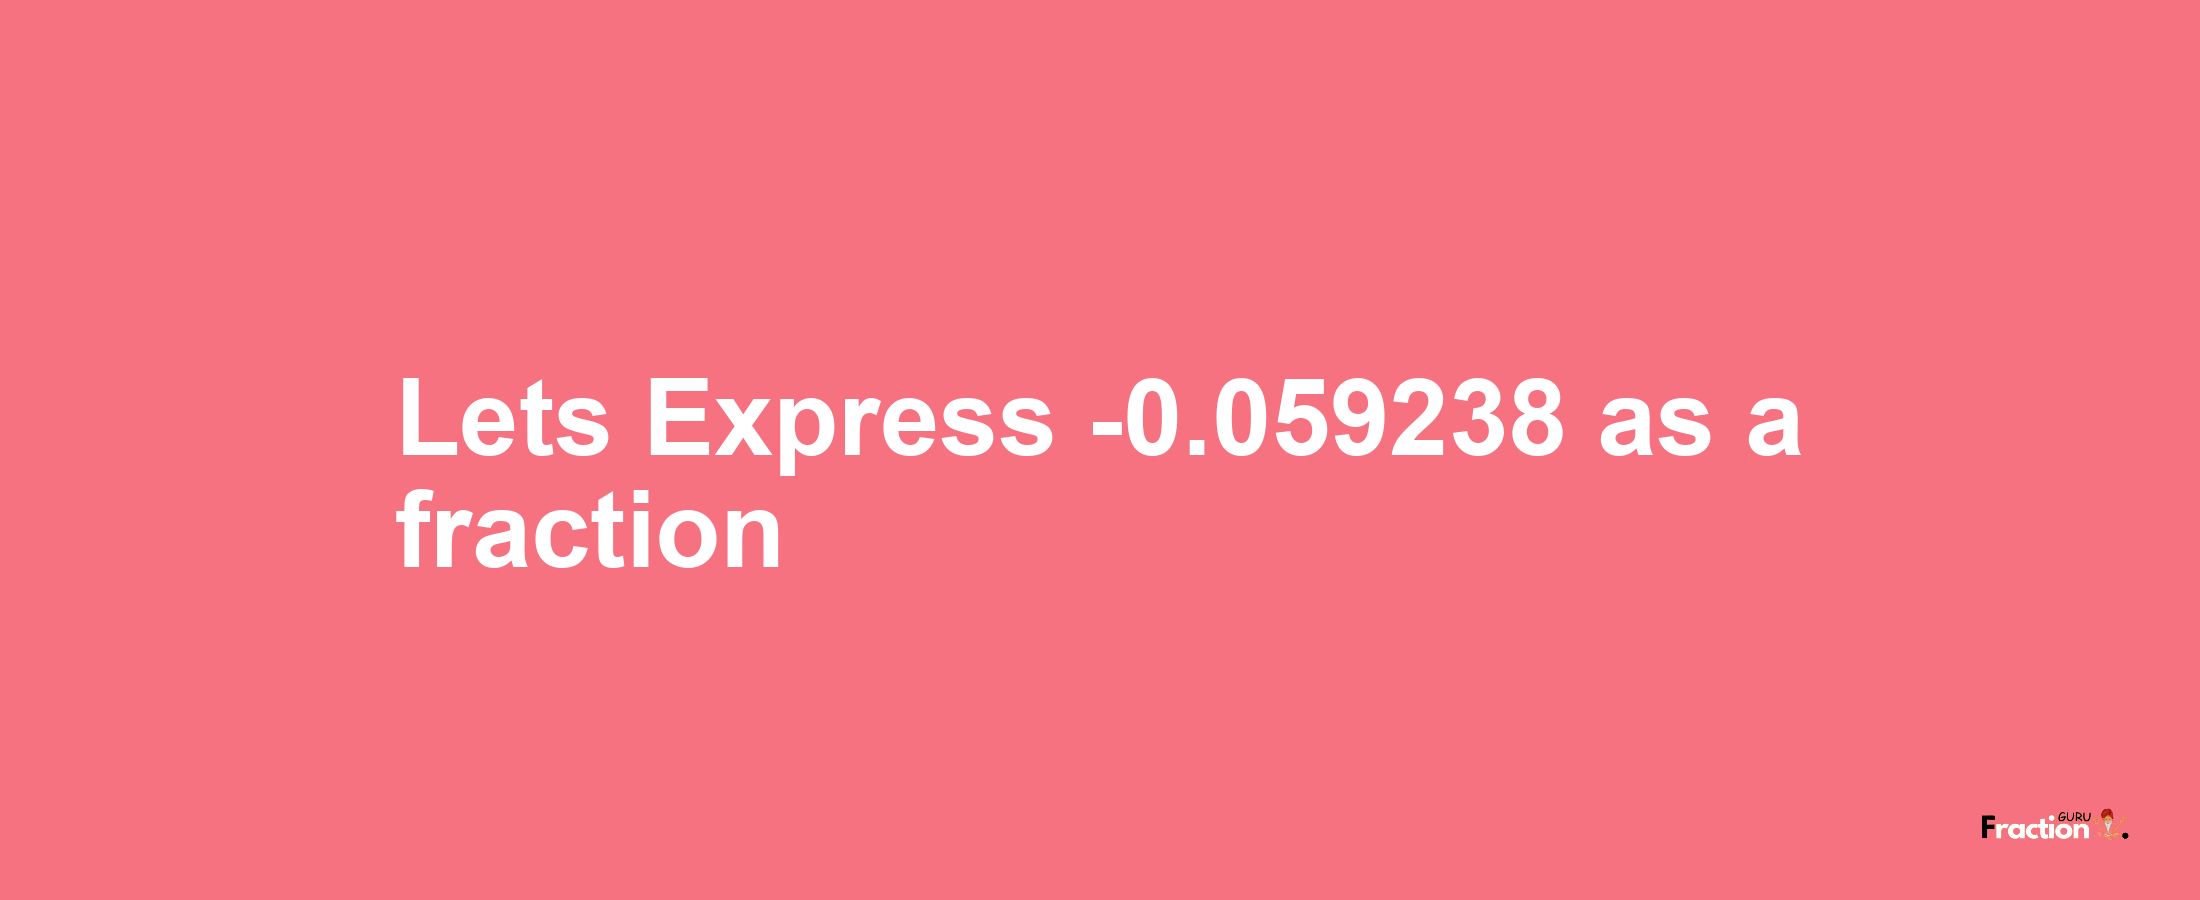 Lets Express -0.059238 as afraction